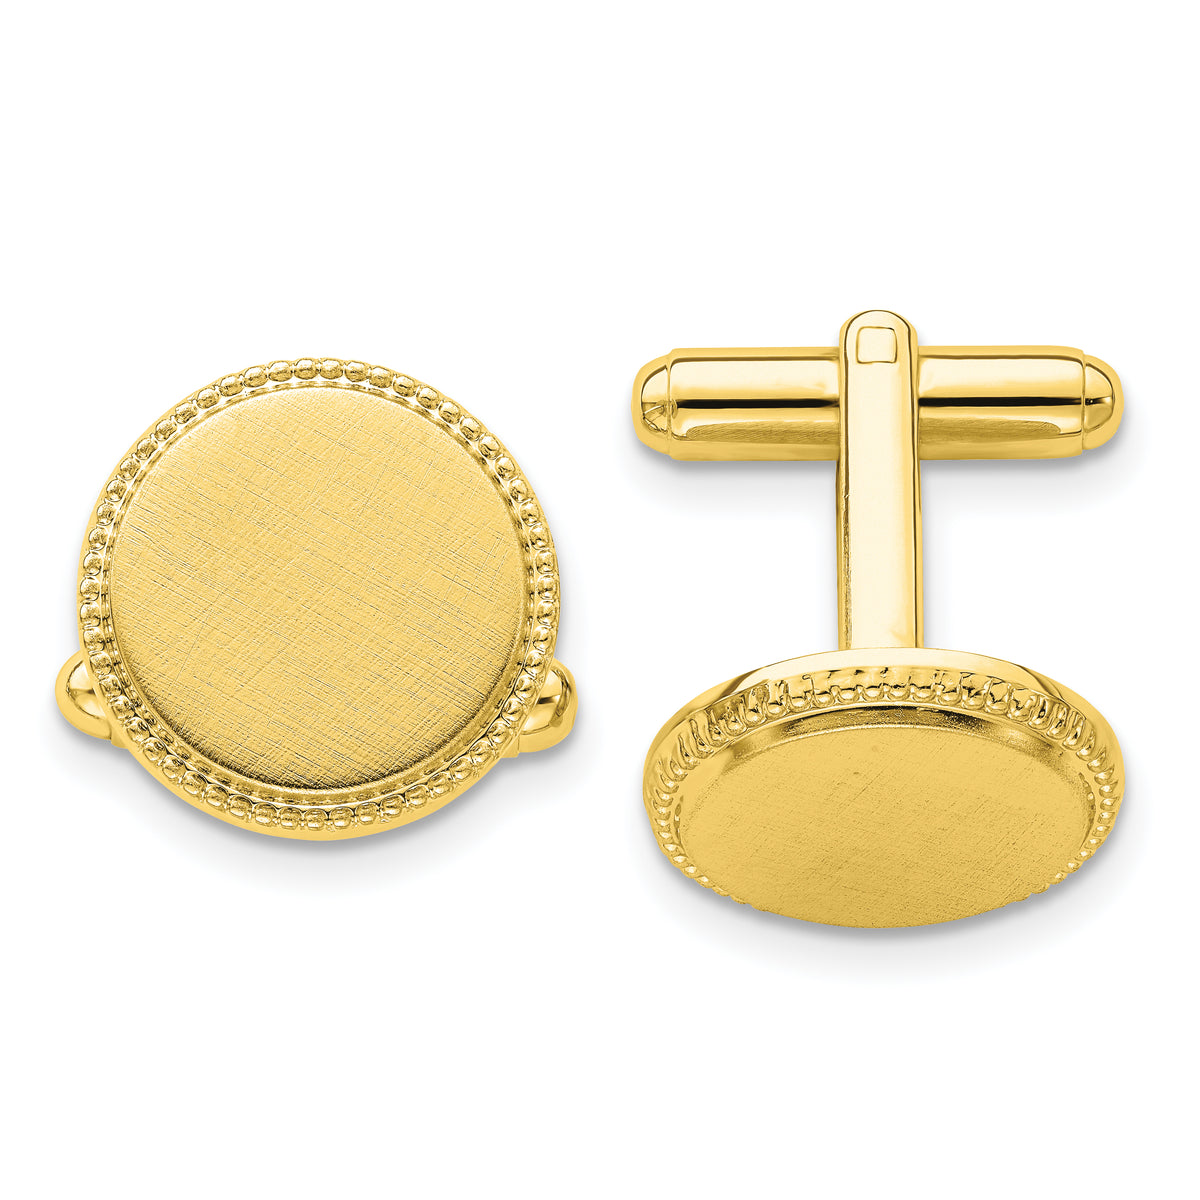 Kelly Waters Gold-plated Satin Florentine Round Beaded Cuff Links